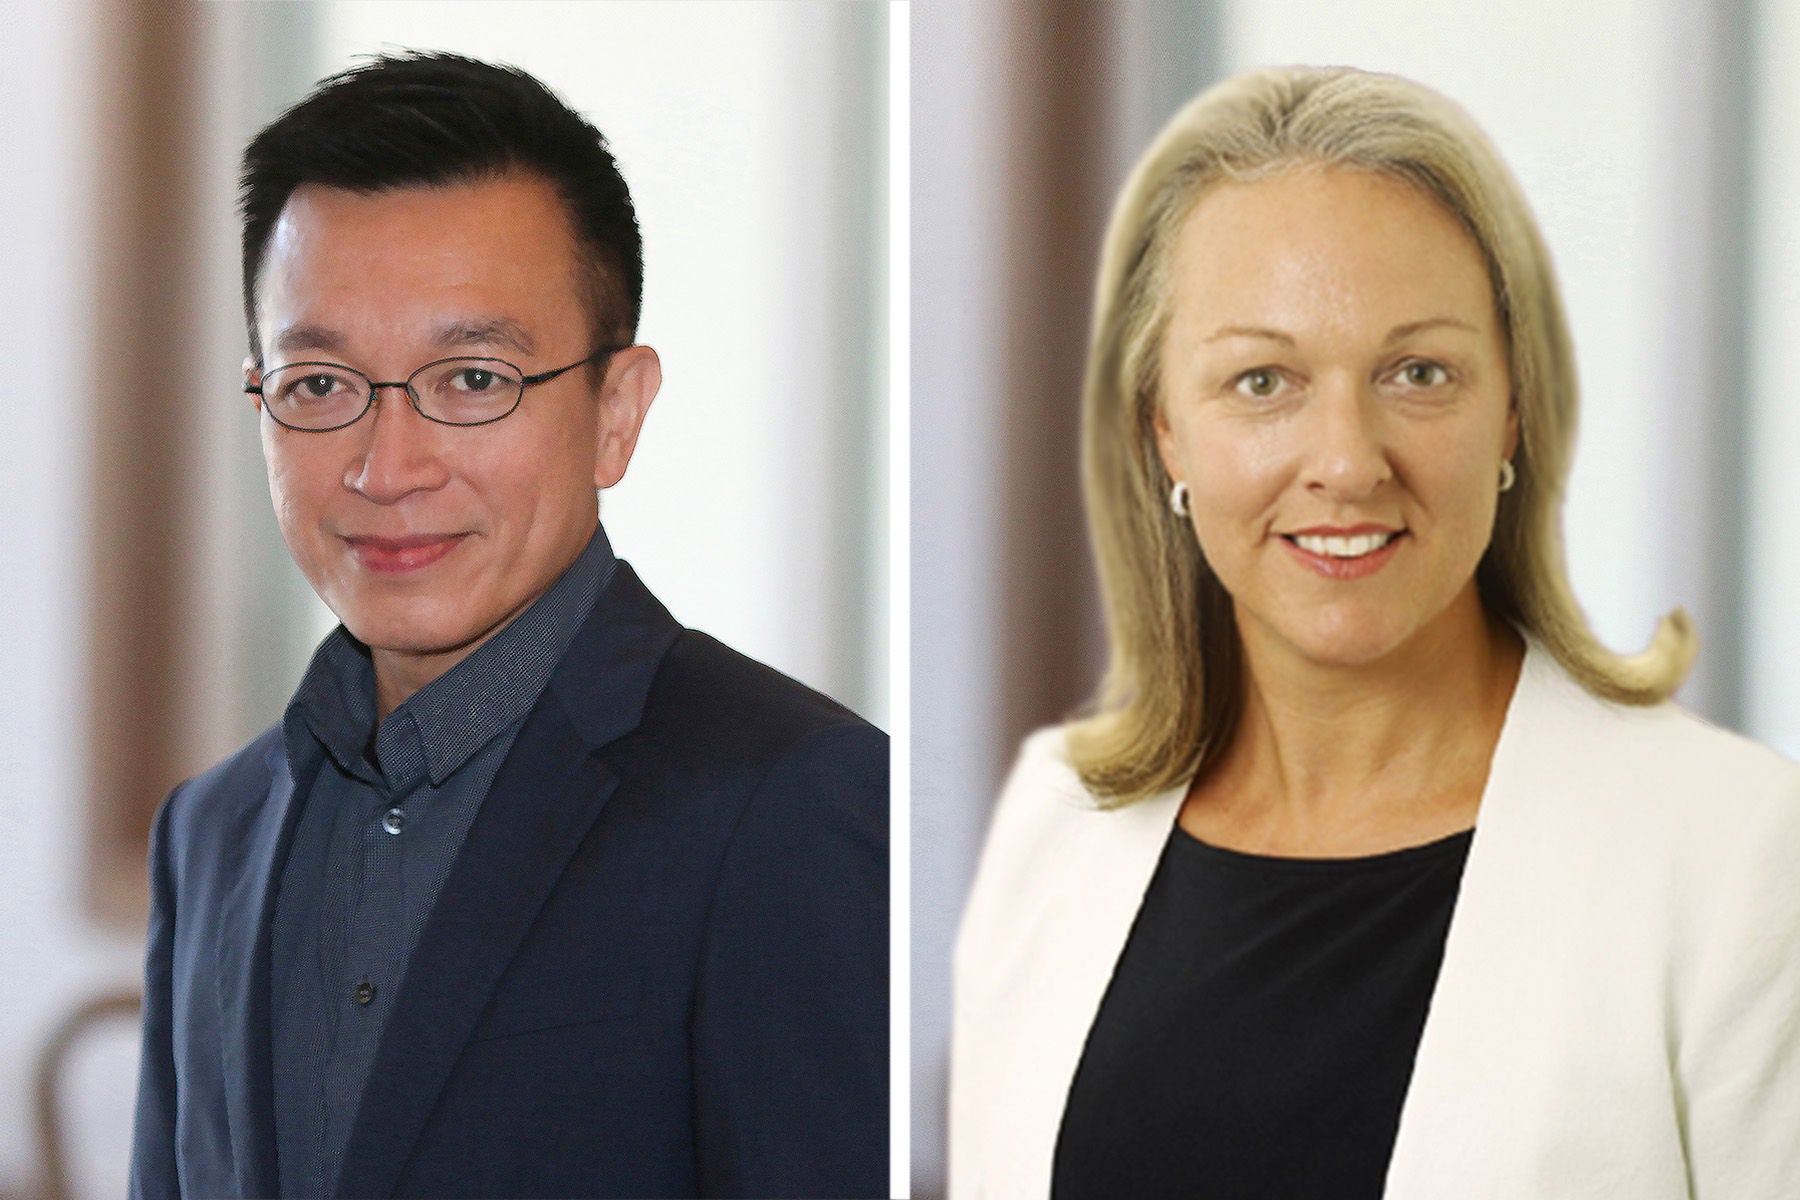 APAC leadership Yew-Poh Mak and Shannon Cotter 